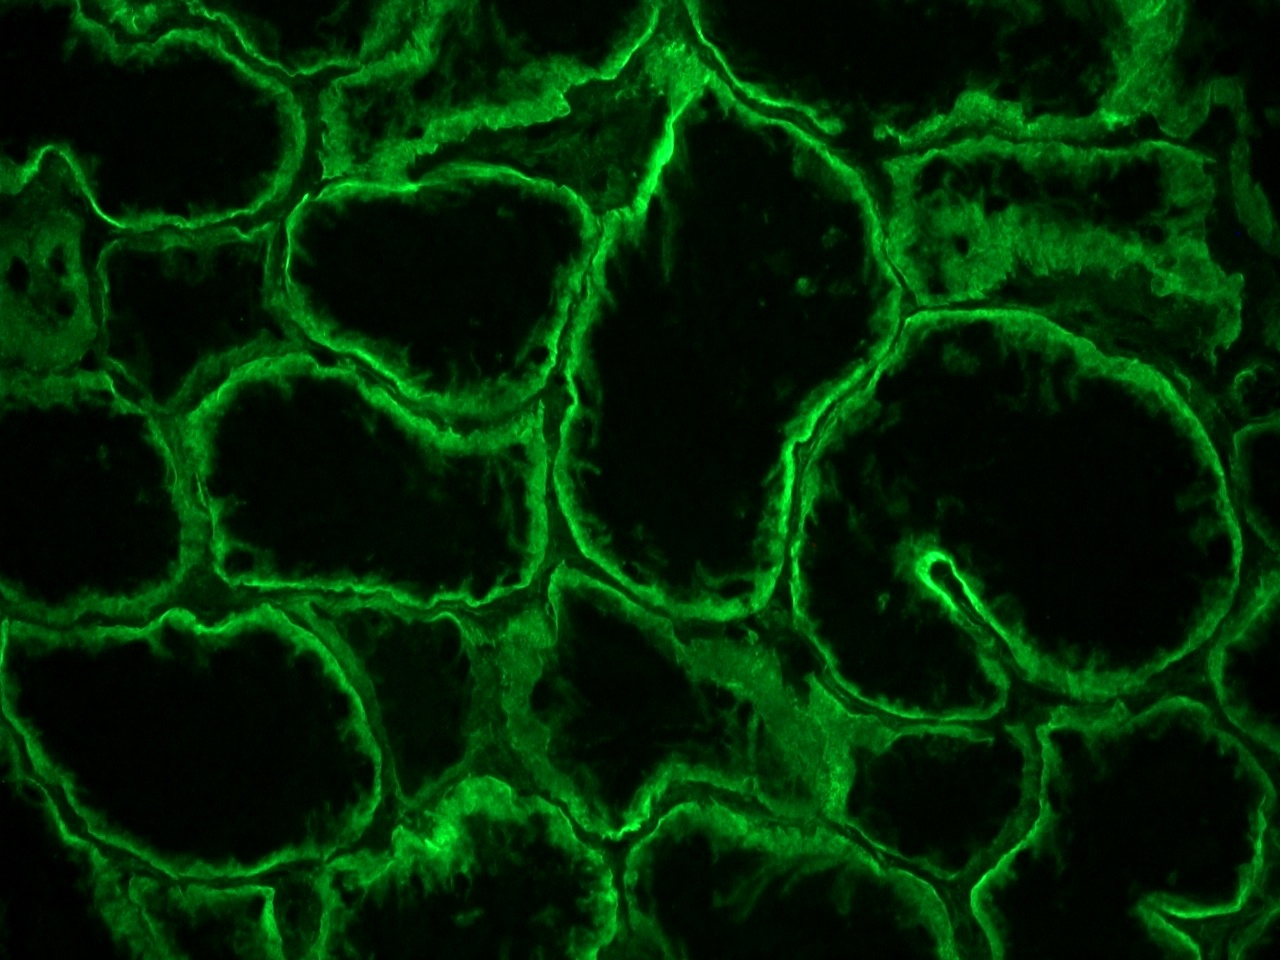 Figure 2: Integrin alpha 6A immunostaining of the basolateral membrane of epithelial cells in a frozen section of human kidney using MUB0908P.